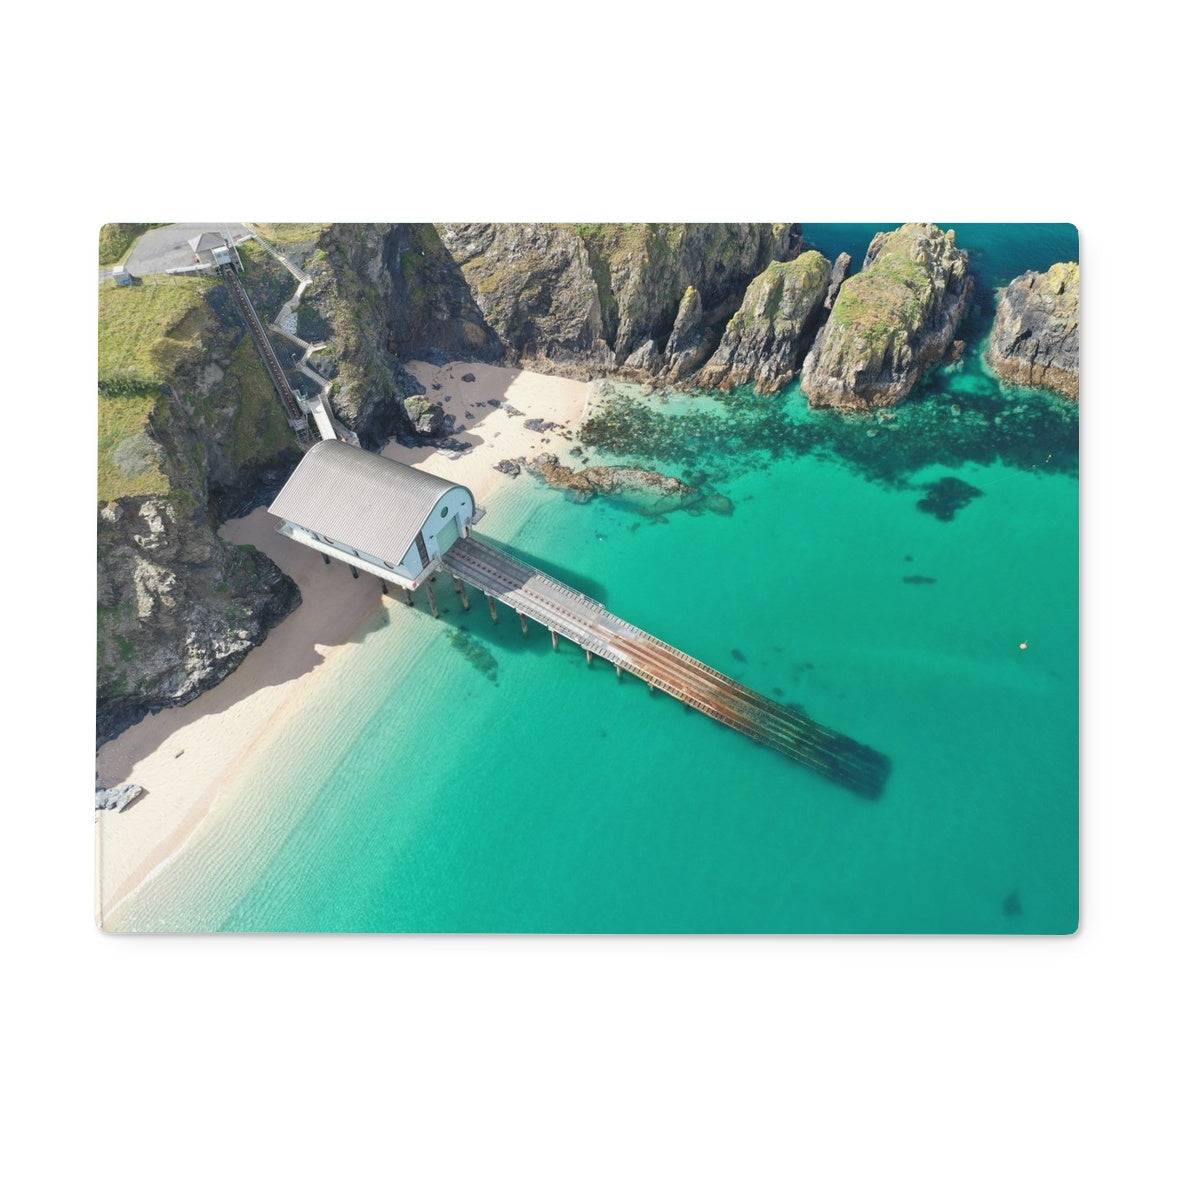 padstow lifeboat station chopping board